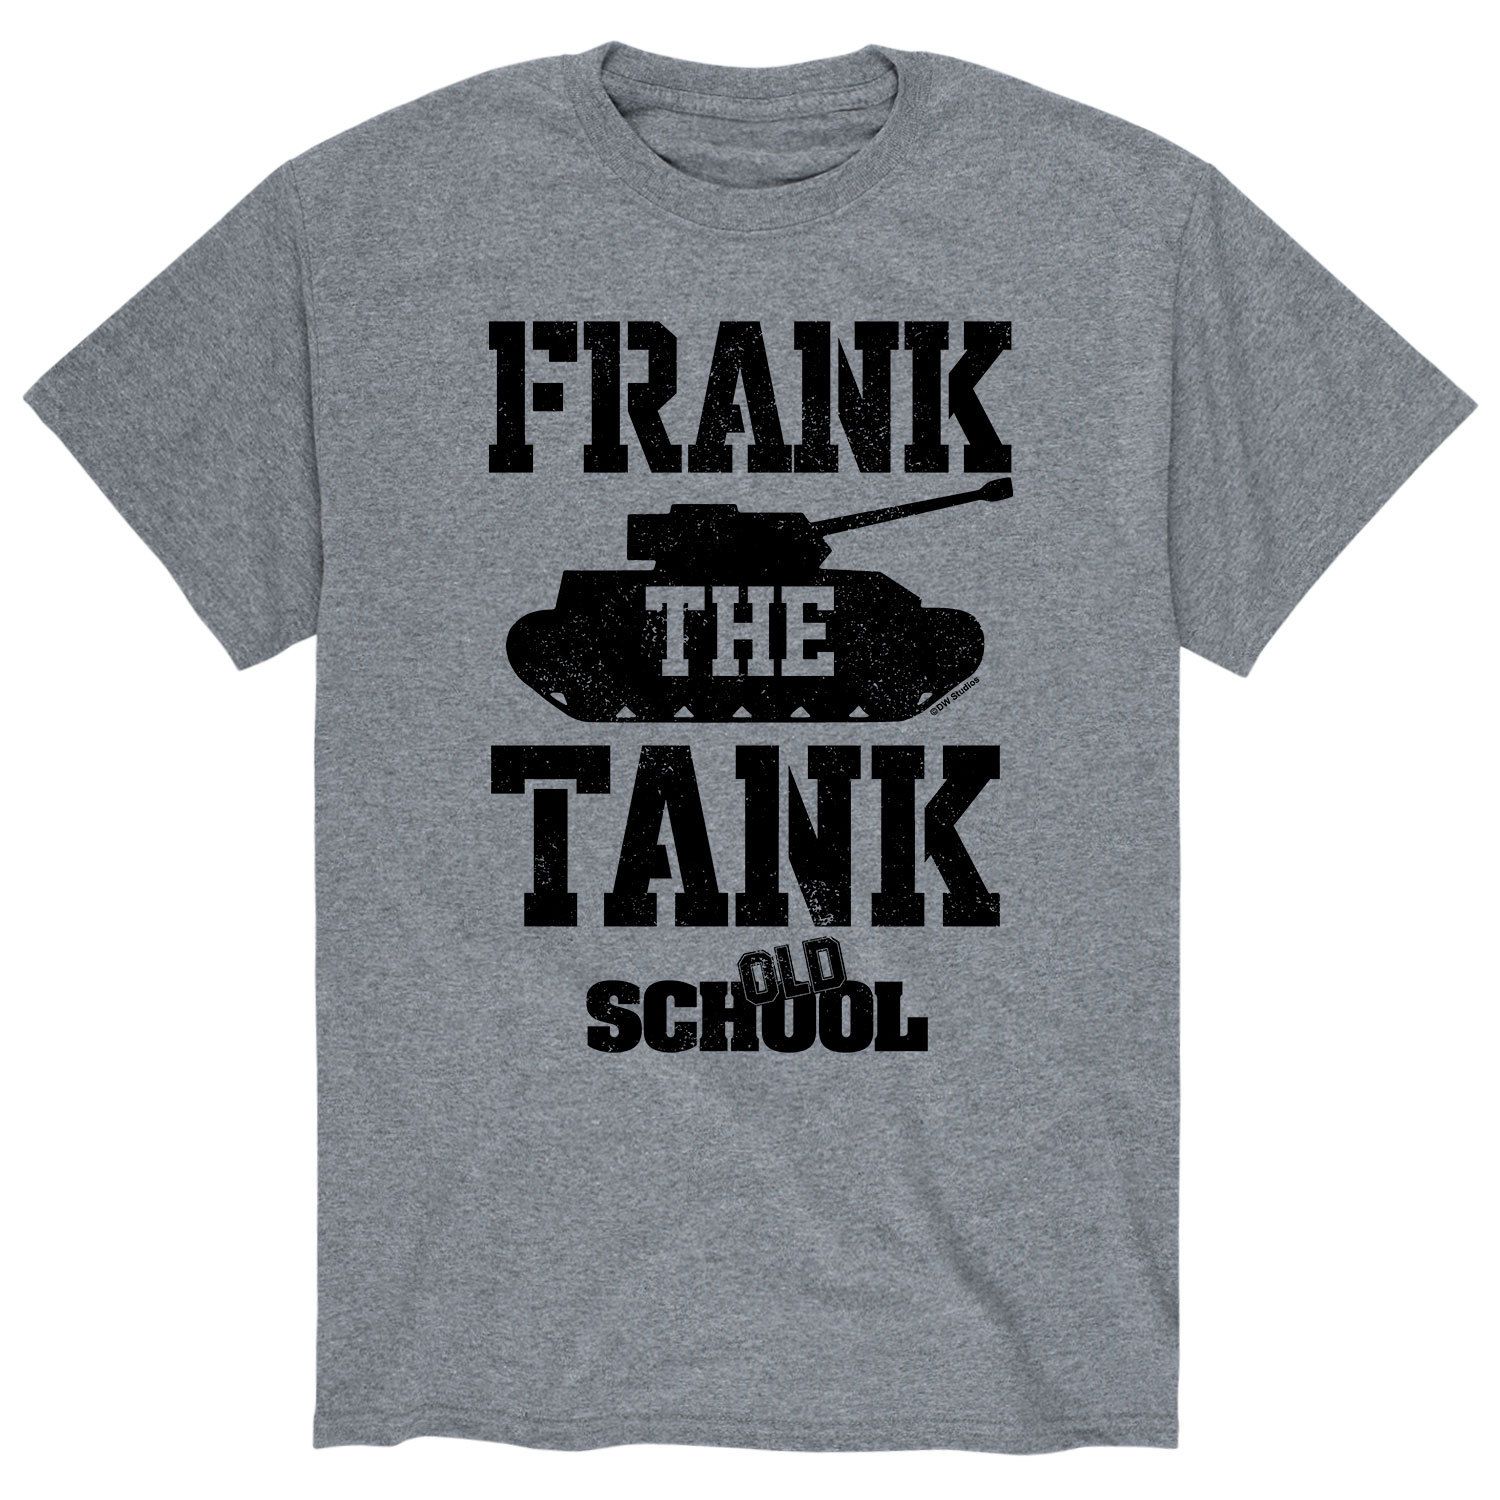 Image for Licensed Character Men's Old School Frank The Tank Tee at Kohl's.